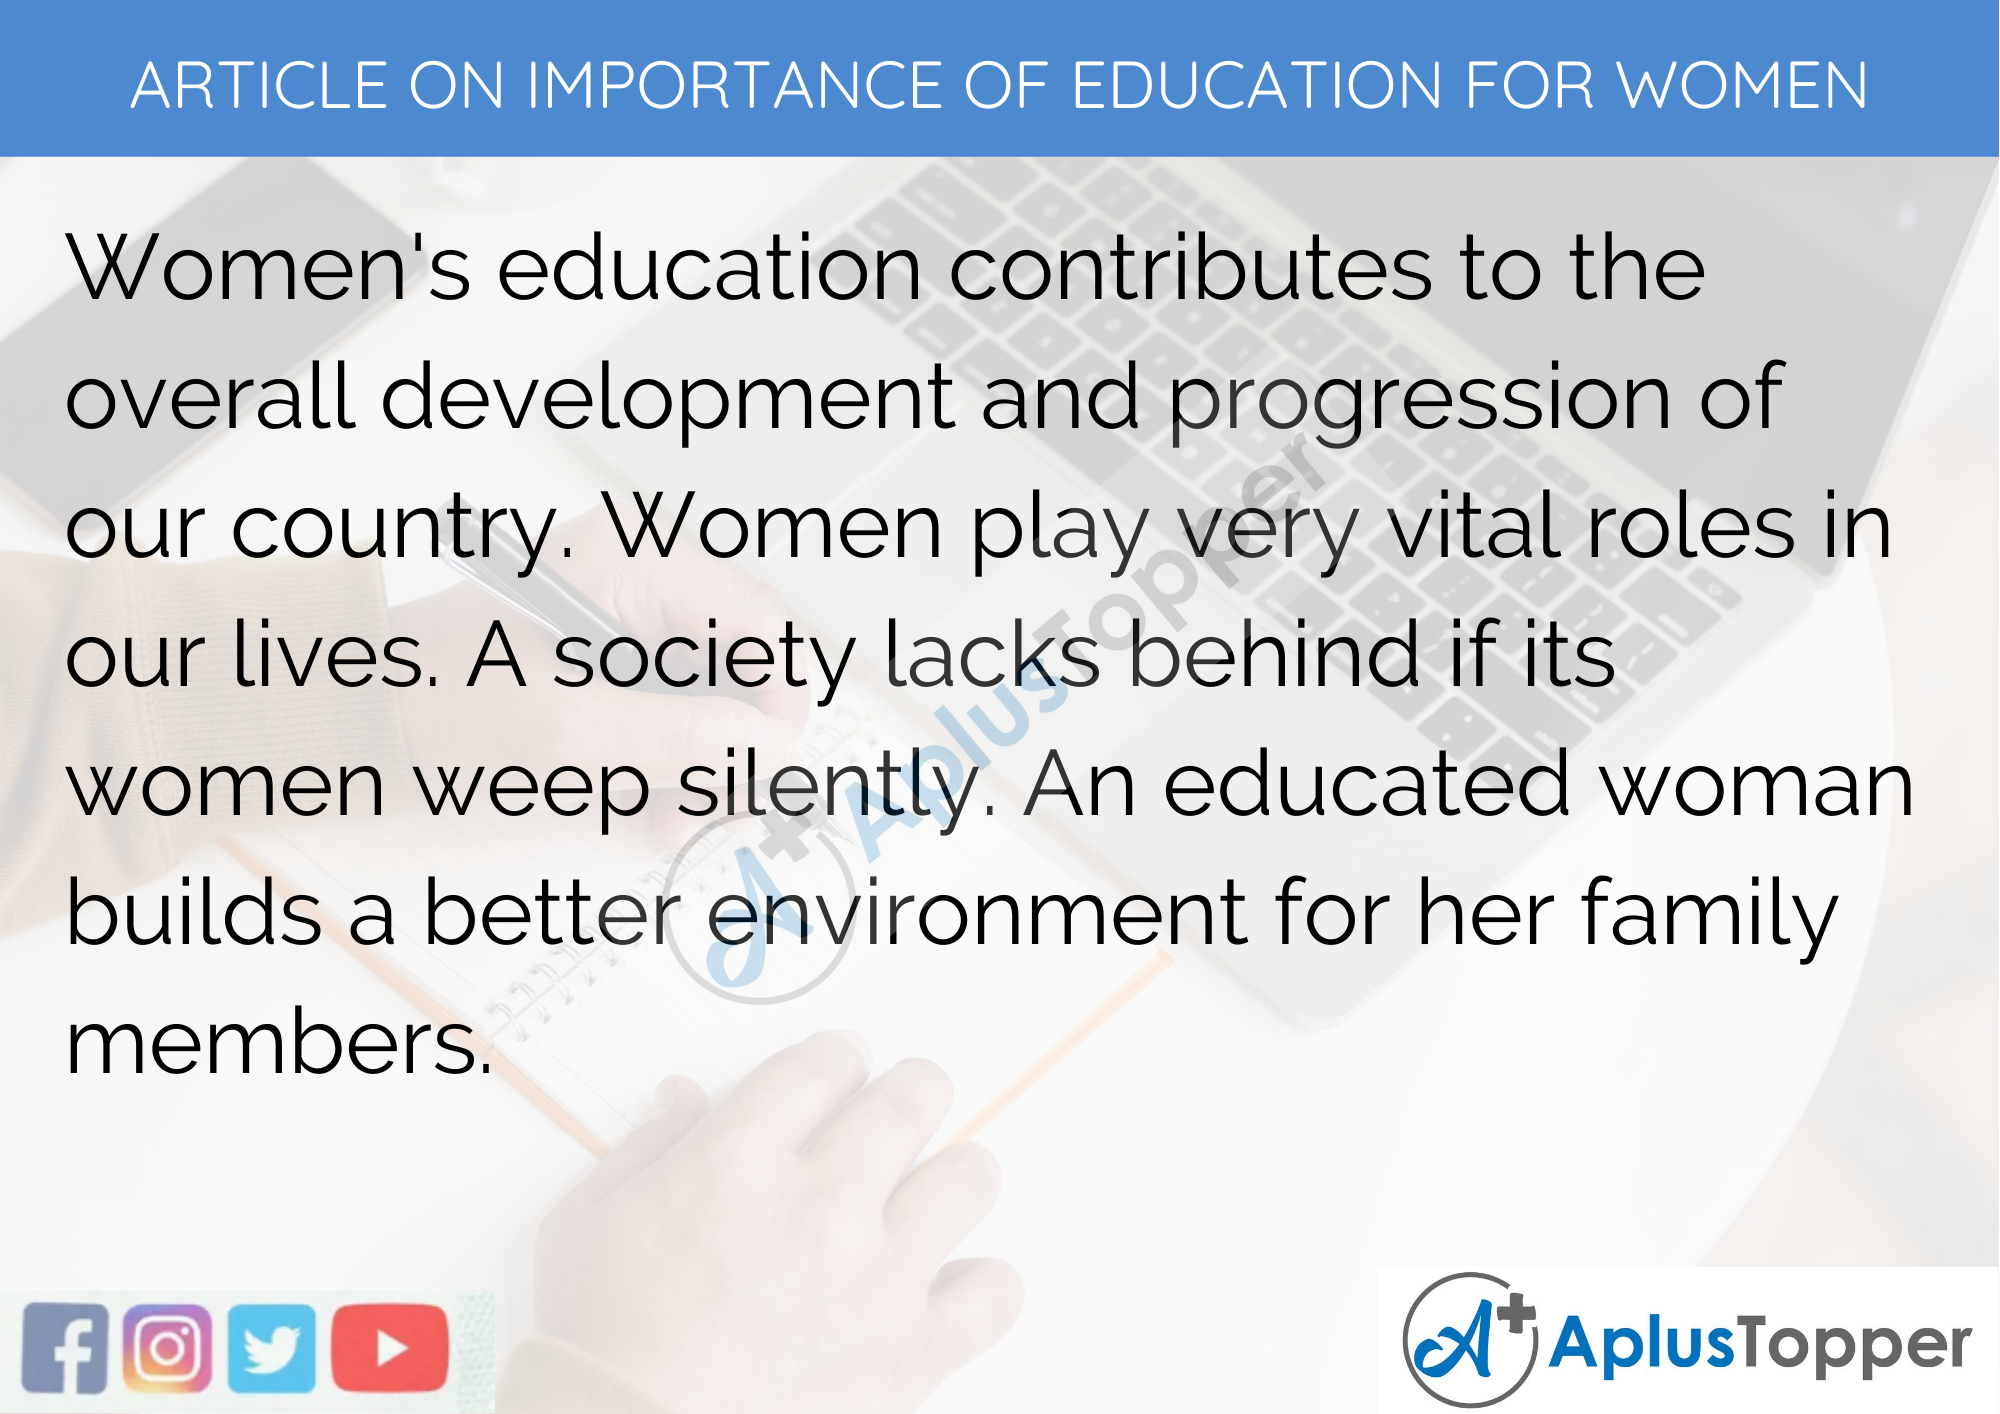 Short Article on Importance of Education for Women 200 Words in English